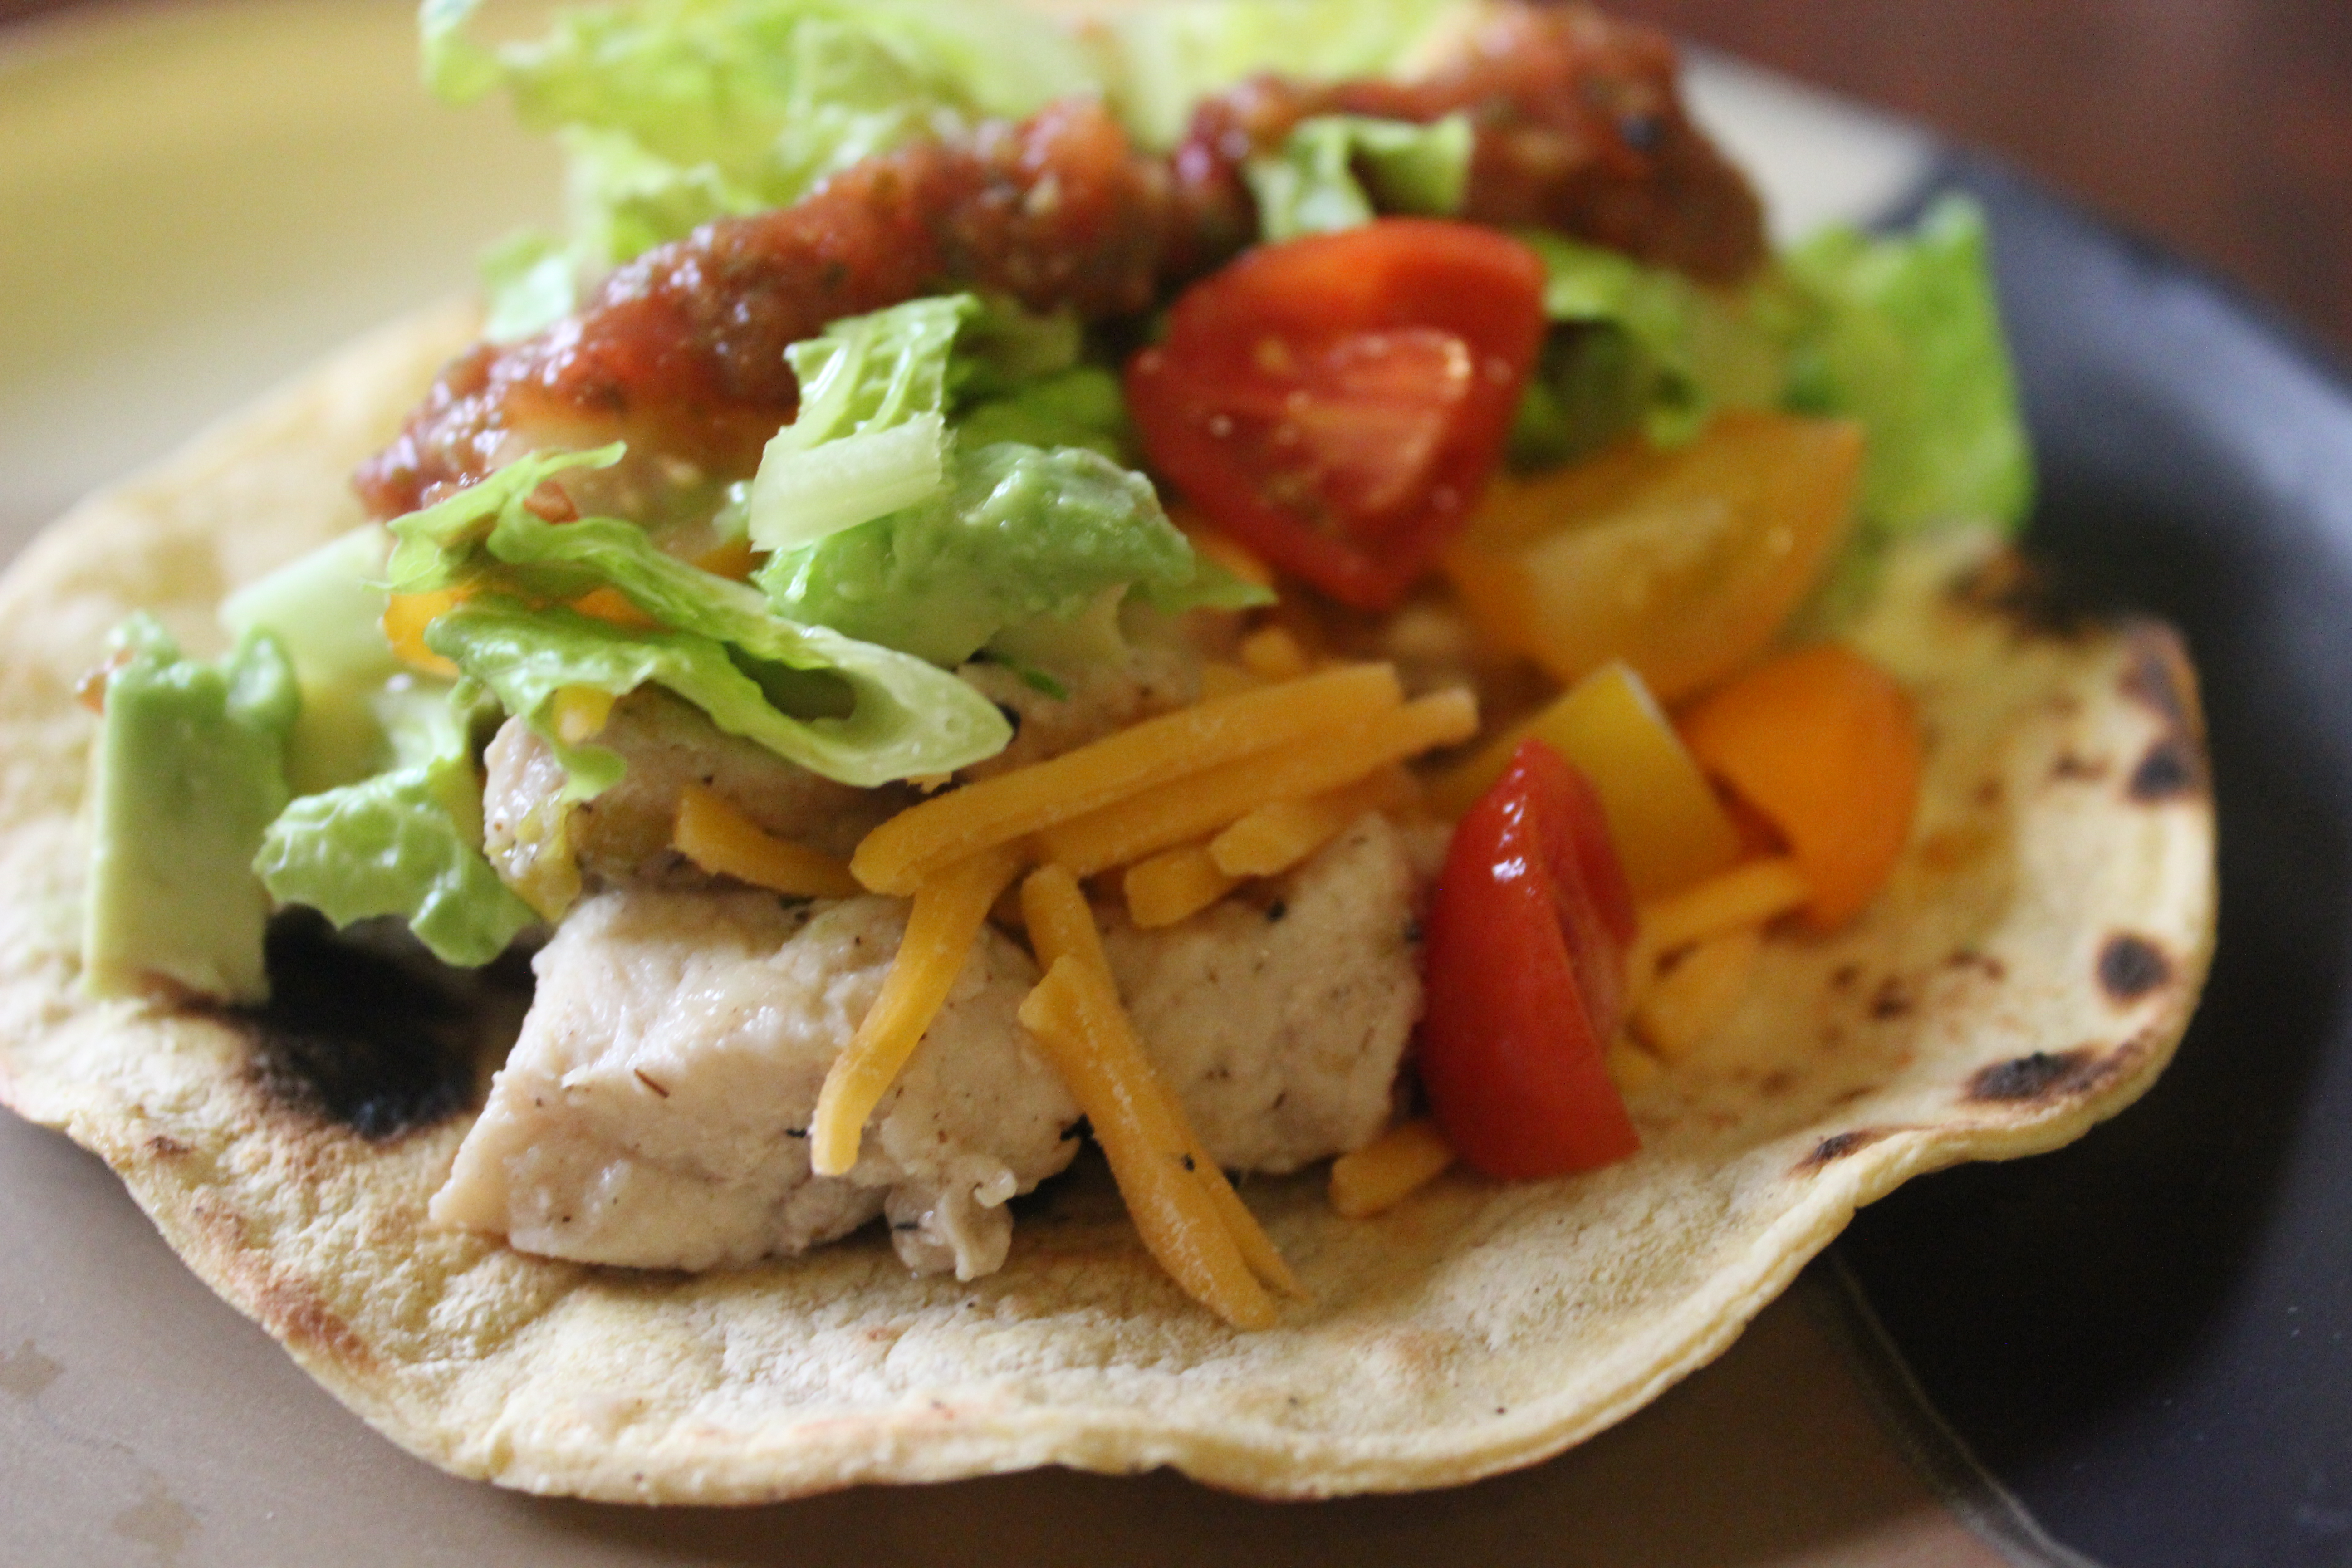 LIME CHICKEN SOFT TACOS